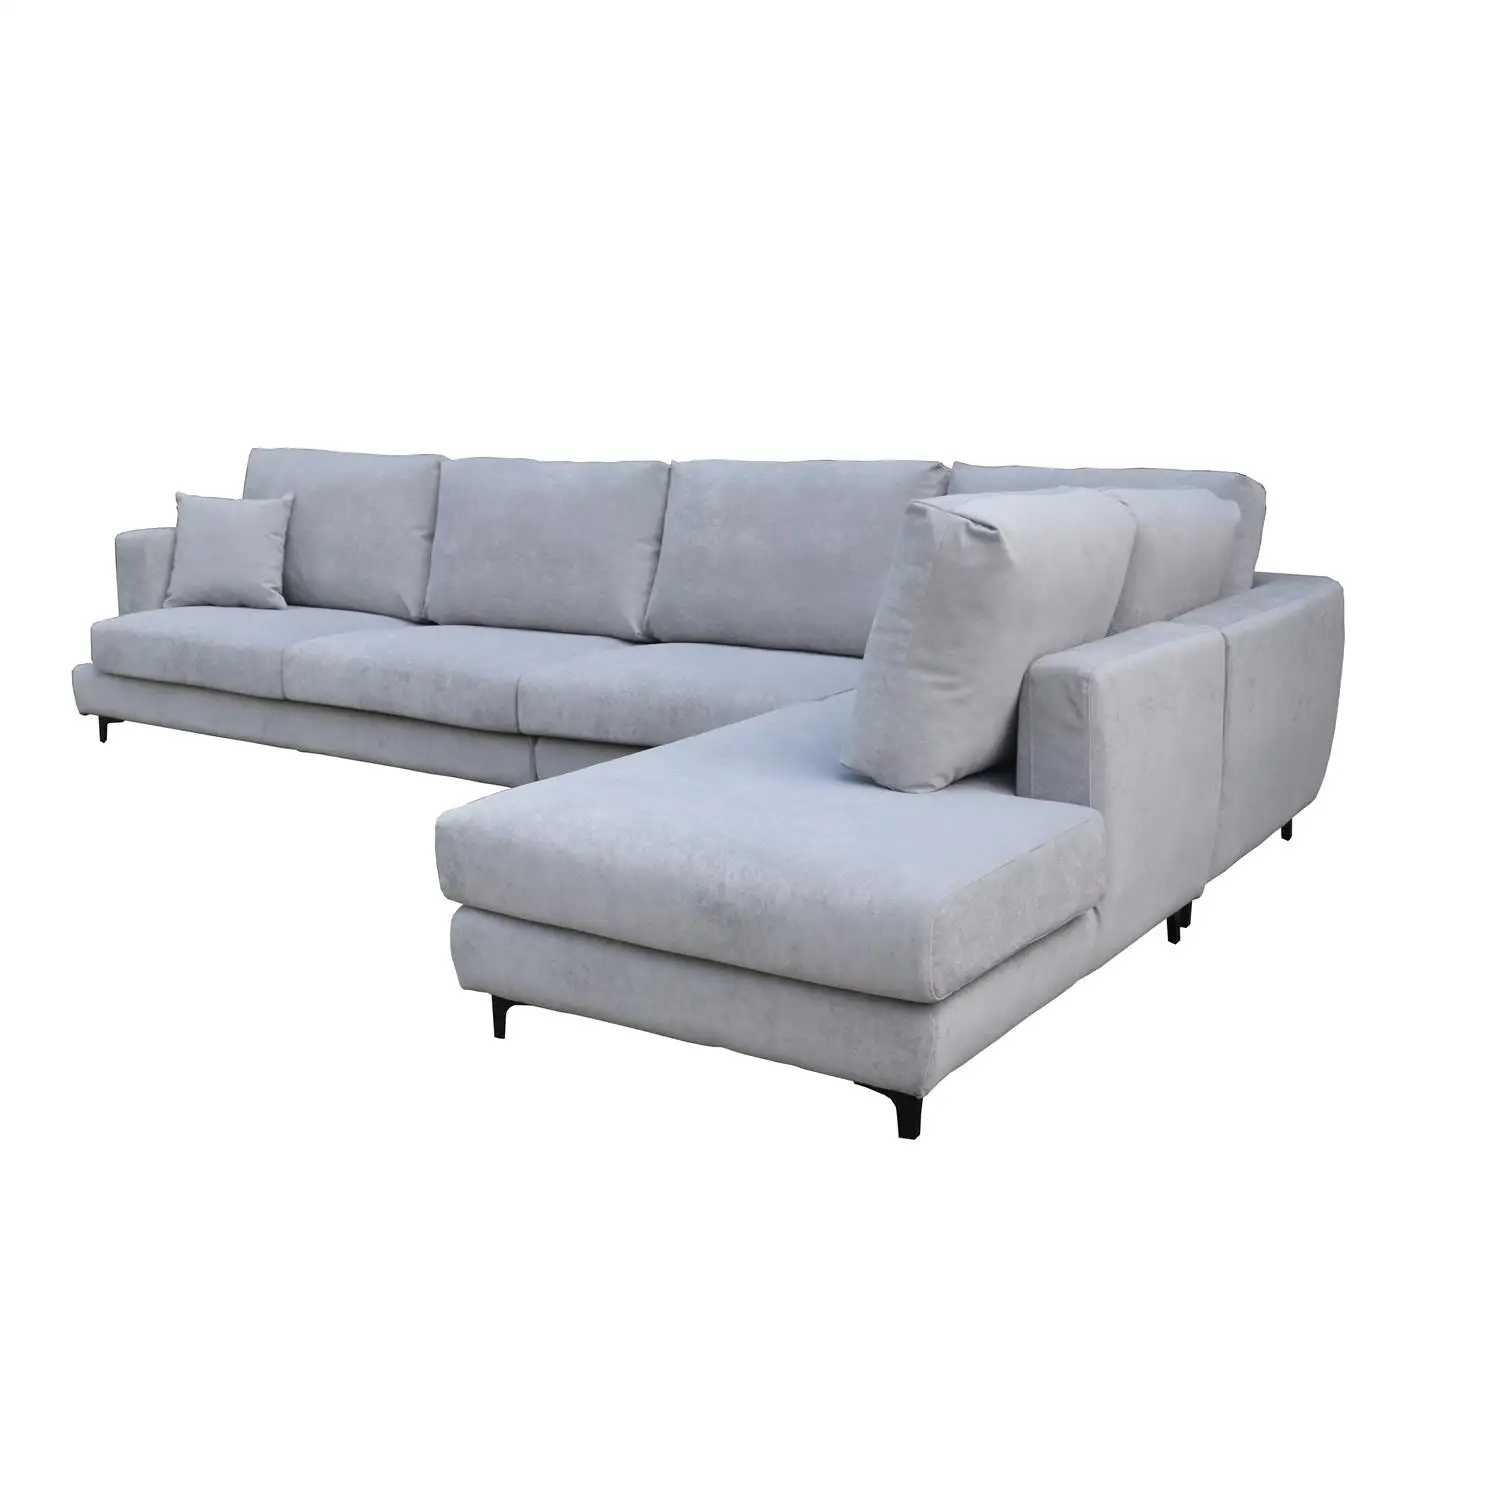 Waterproof fabric living room sofas?old?  grey fabric furniture L sofa set for home use